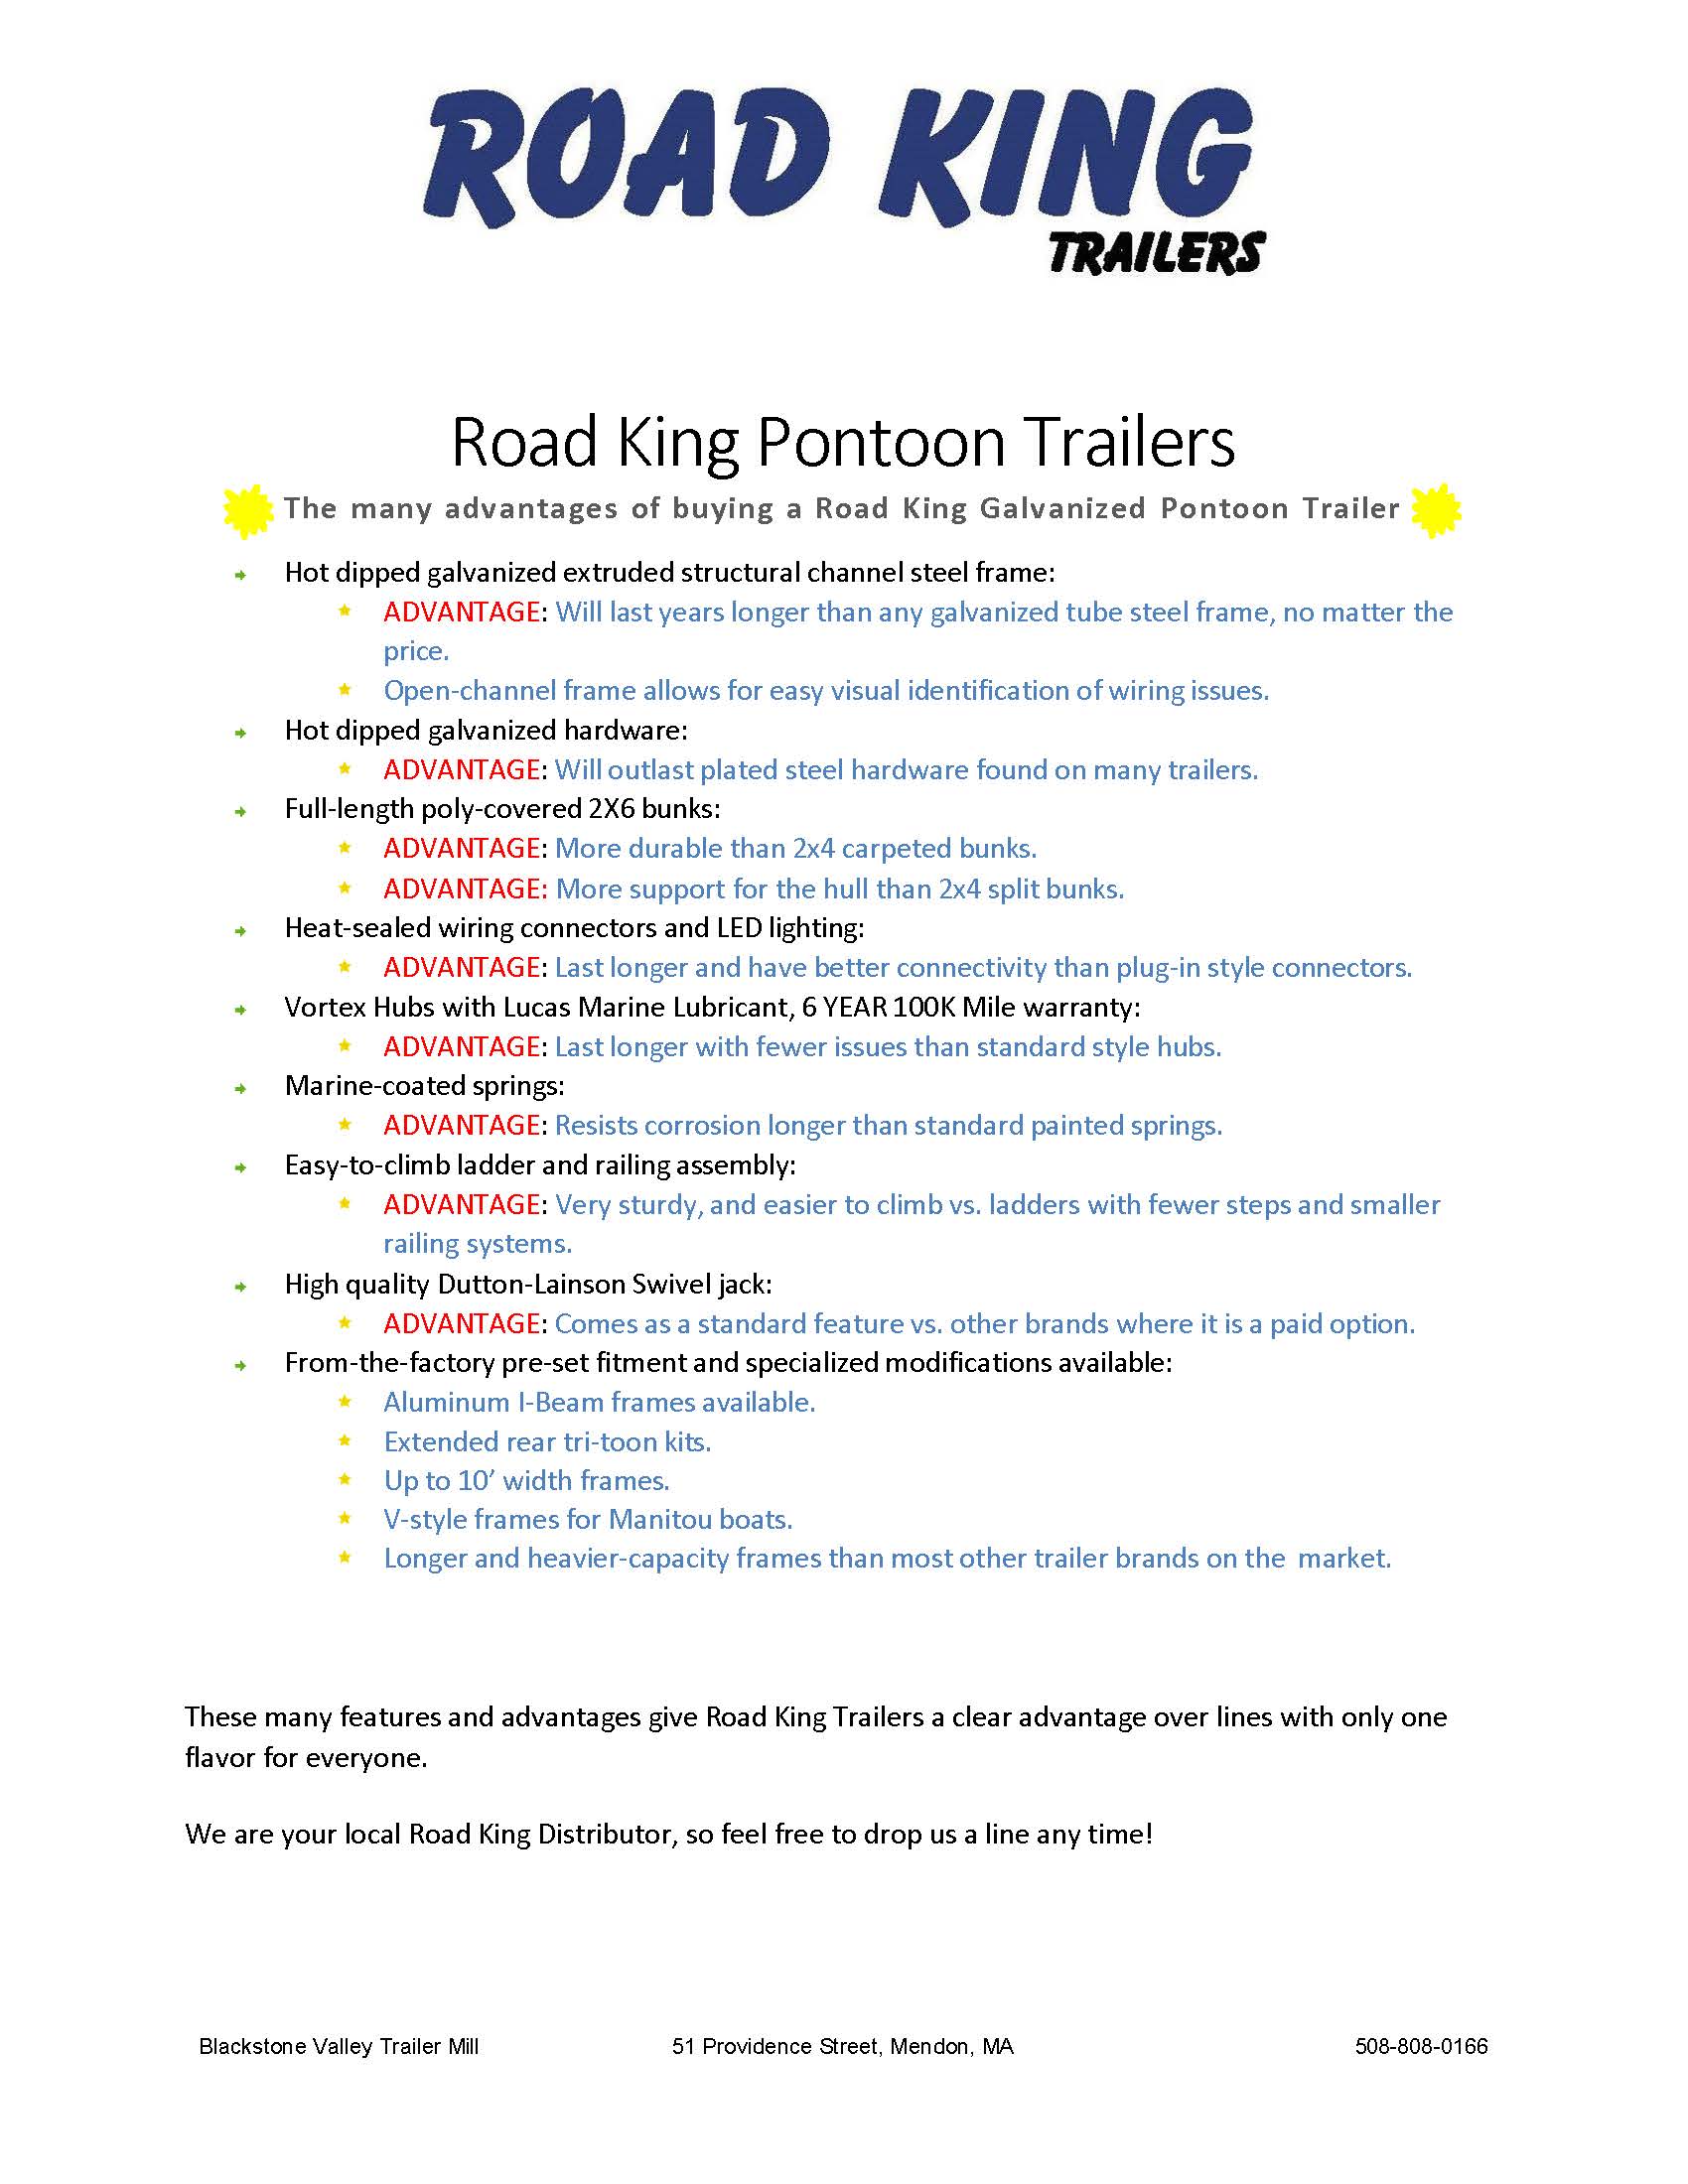 Road King Pontoon Trailers flyer_Page_1